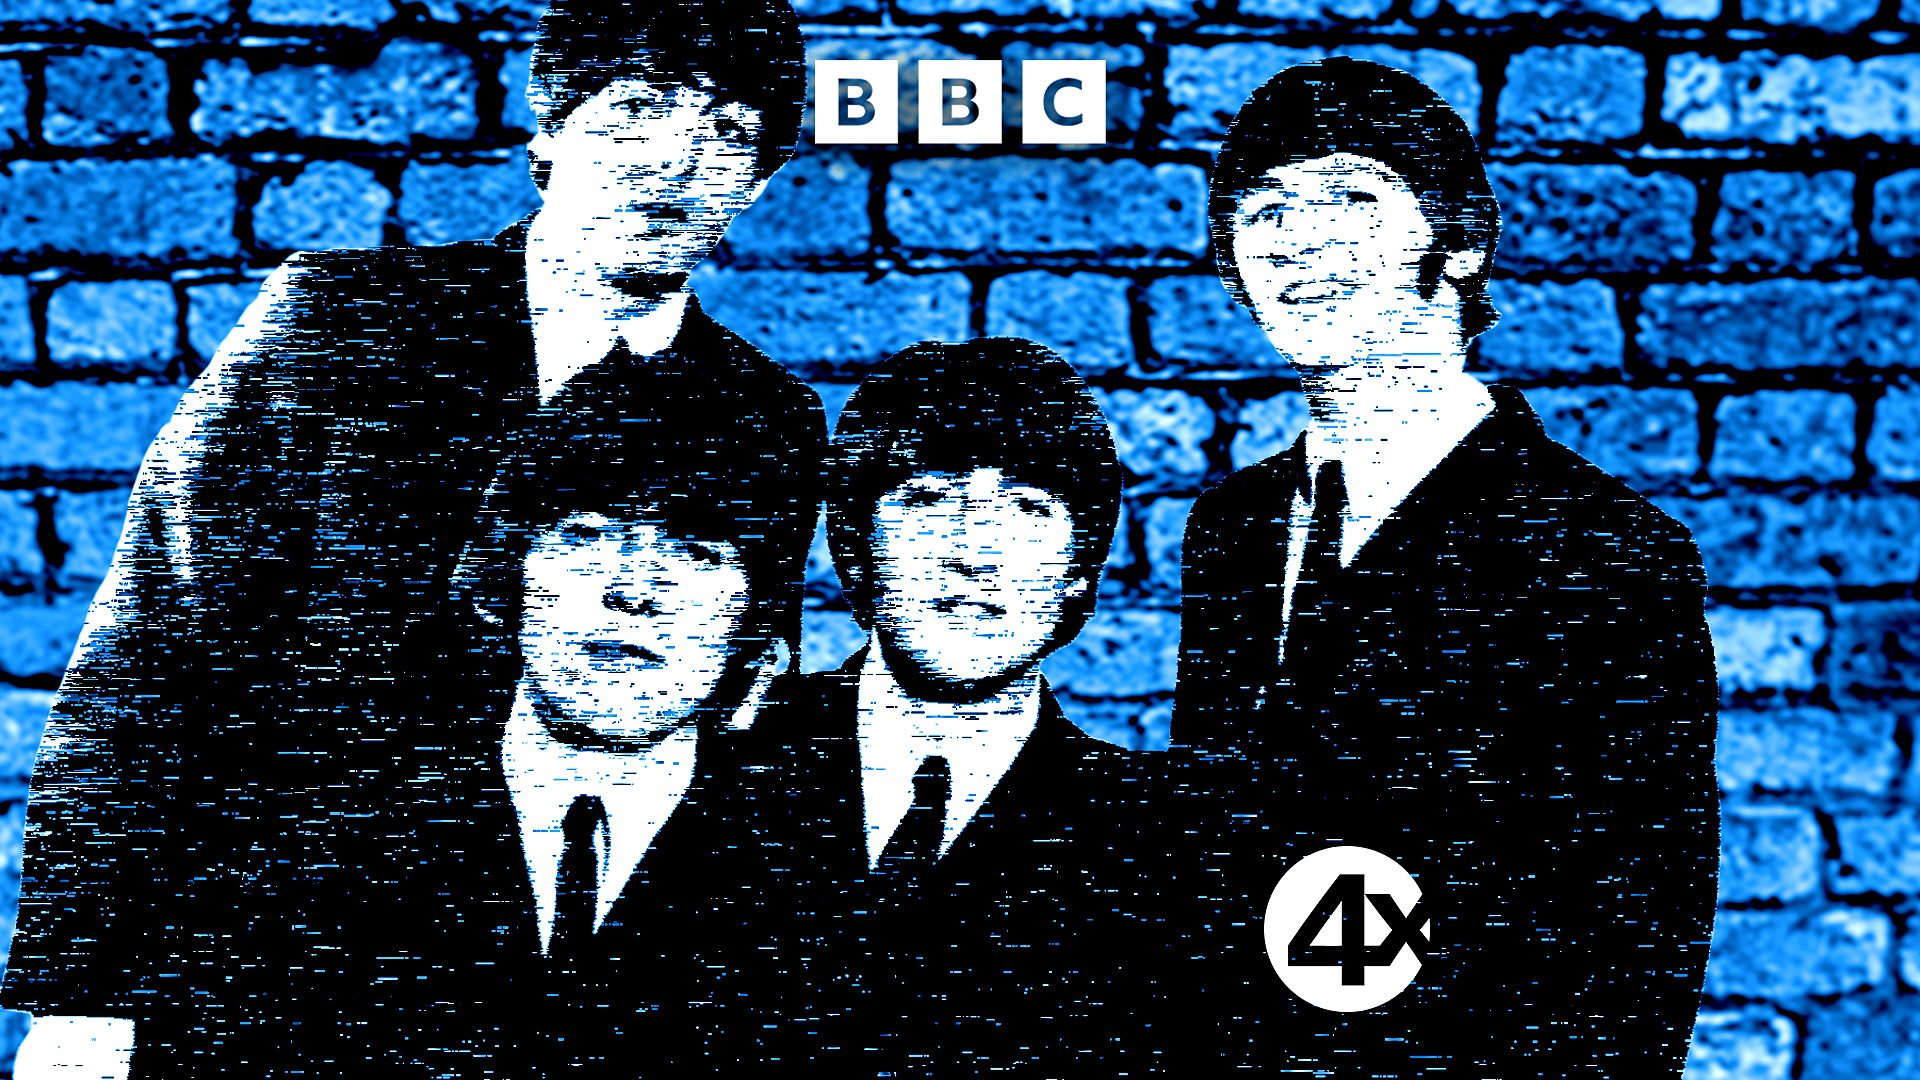 BBC Radio 4 - One Two Three Four - The Beatles In Time by Craig Brown